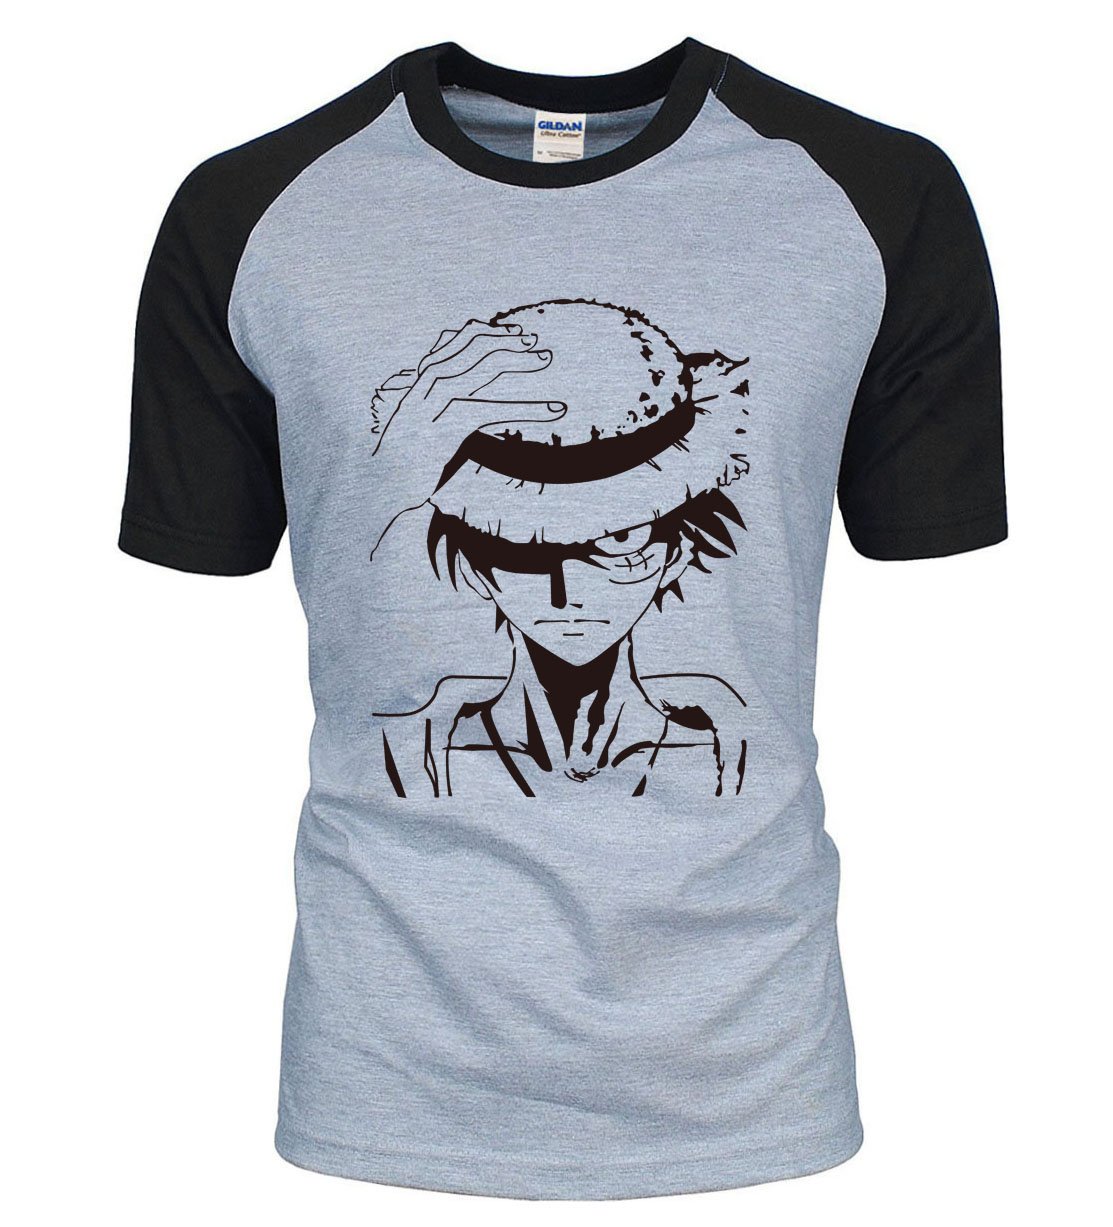 One Piece Luffy Straw Hat T-Shirt ANM0608 Black / S Official One Piece Merch